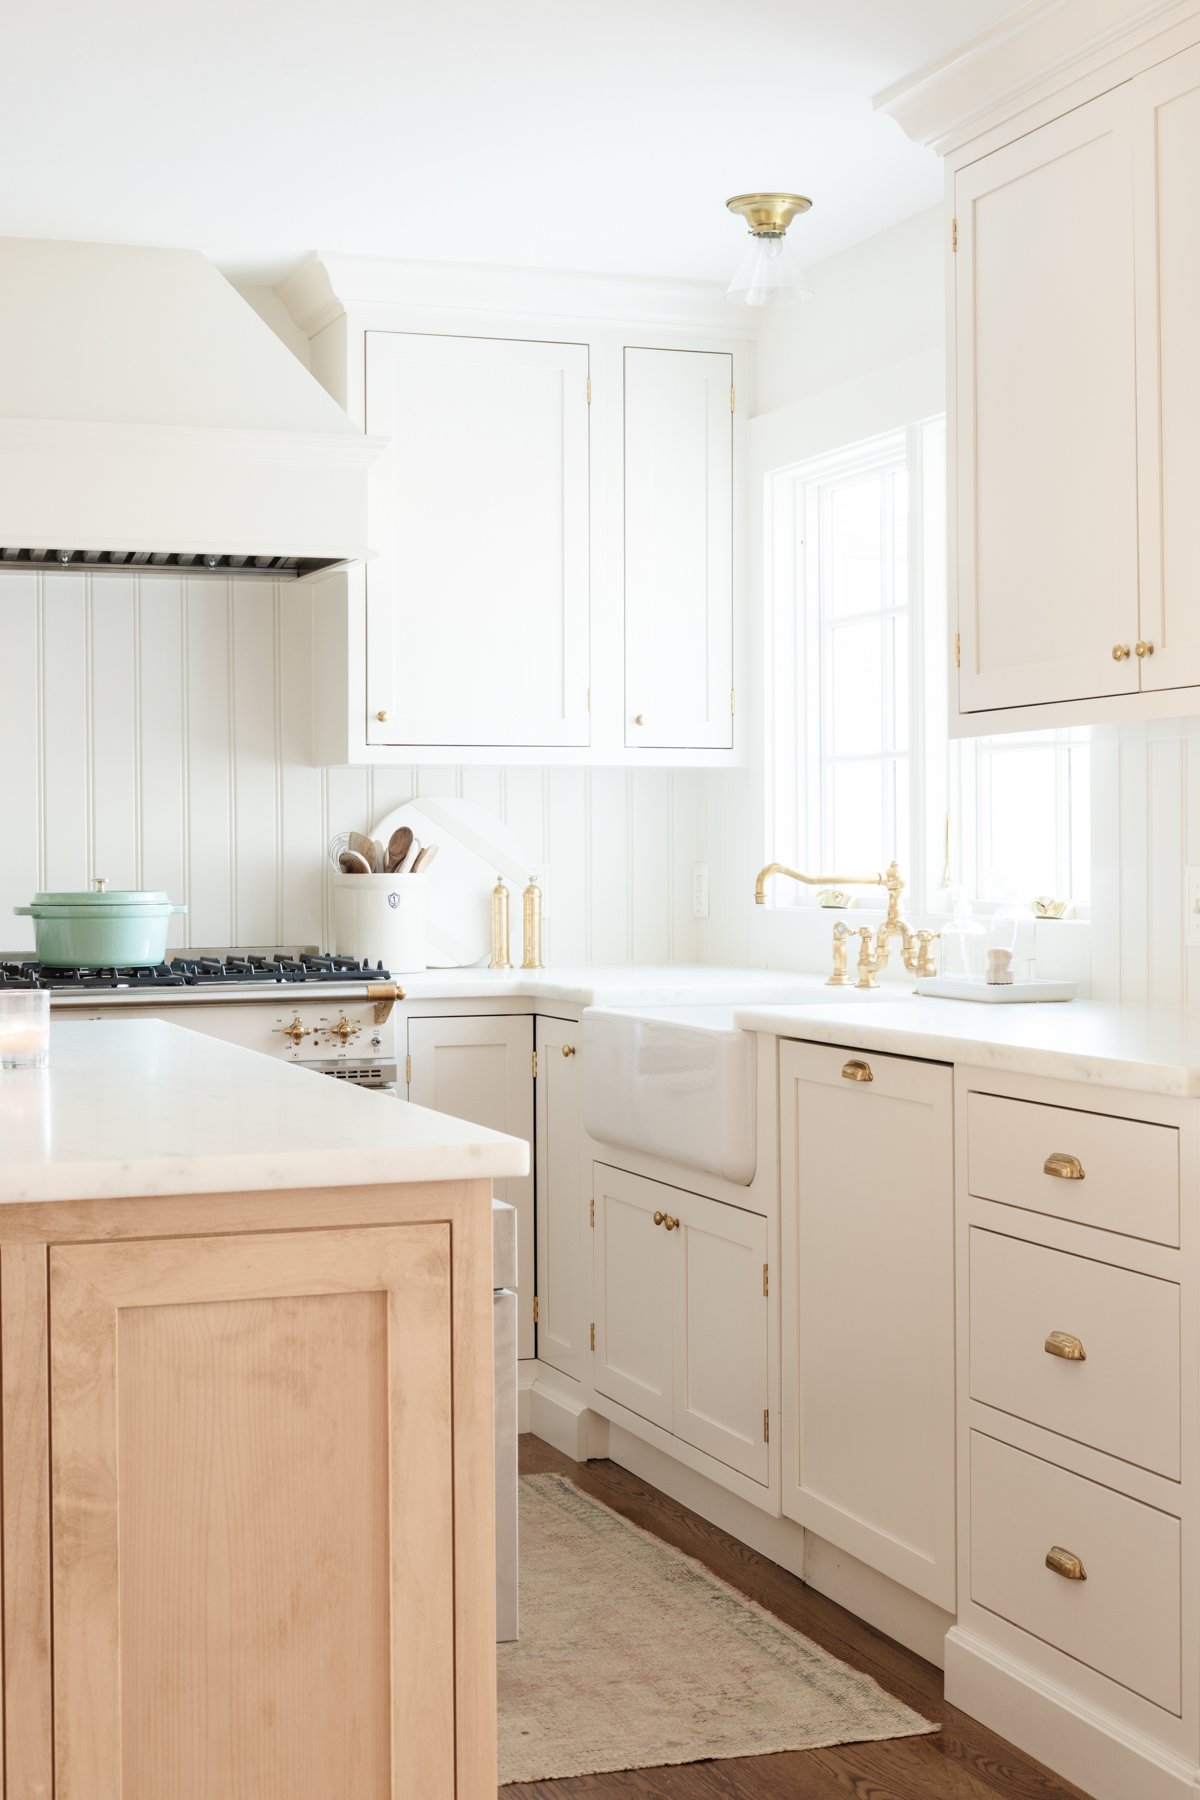 A cream kitchen with custom cabinetry and brass accents.